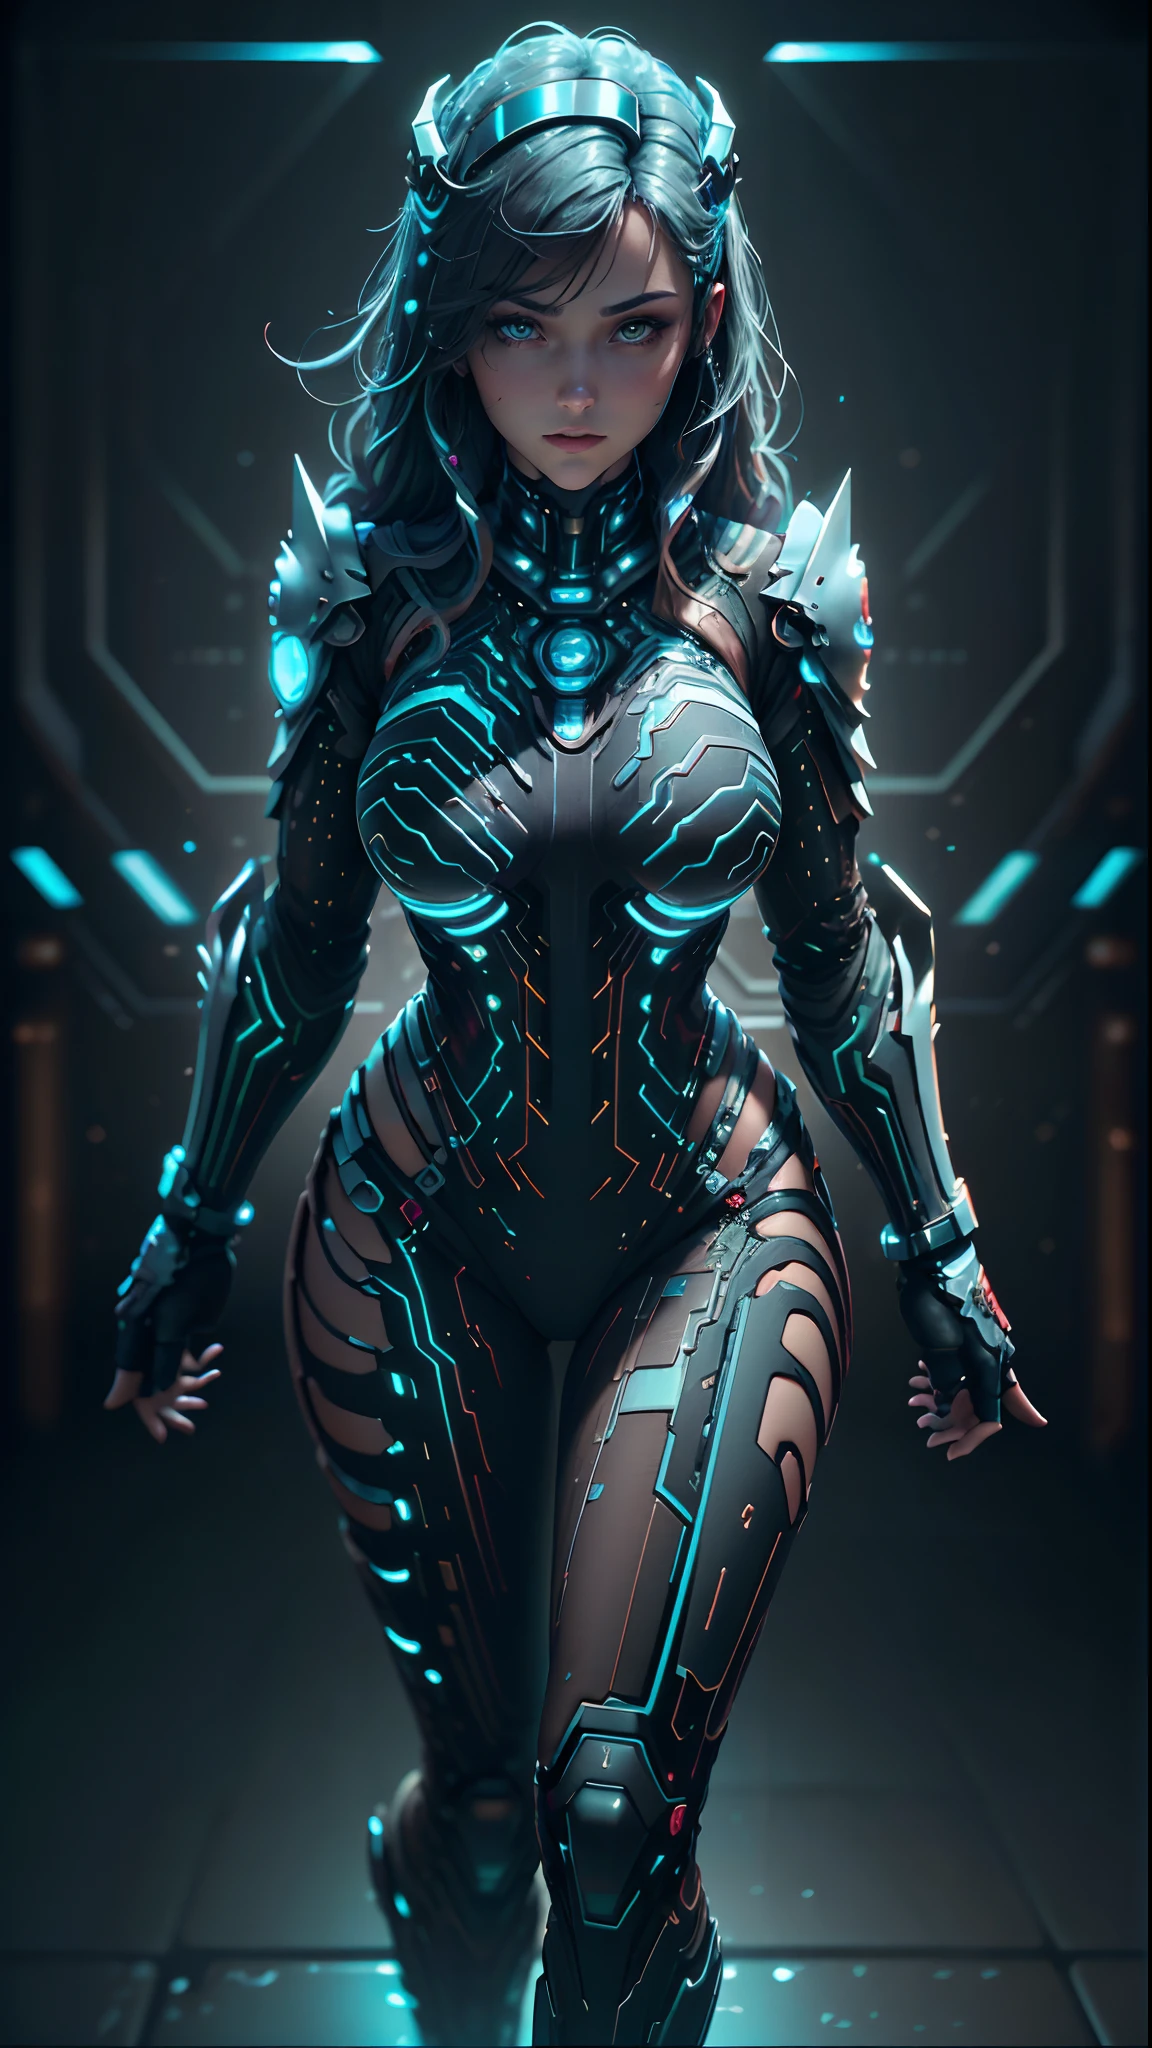 ((Best quality)), ((masterpiece)), (detailed:1.4), 3D, an image of a beautiful cyberpunk female with thick voluminous hair,light particles, pure energy chaos antitech,HDR (High Dynamic Range),Ray Tracing,NVIDIA RTX,Super-Resolution,Unreal 5,Subsurface scattering,PBR Texturing,Post-processing,Anisotropic Filtering,Depth-of-field,Maximum clarity and sharpness,Multi-layered textures,Albedo and Specular maps,Surface shading,Accurate simulation of light-material interaction,Perfect proportions,Octane Render,Two-tone lighting,Wide aperture,Low ISO,White balance,Rule of thirds,8K RAW